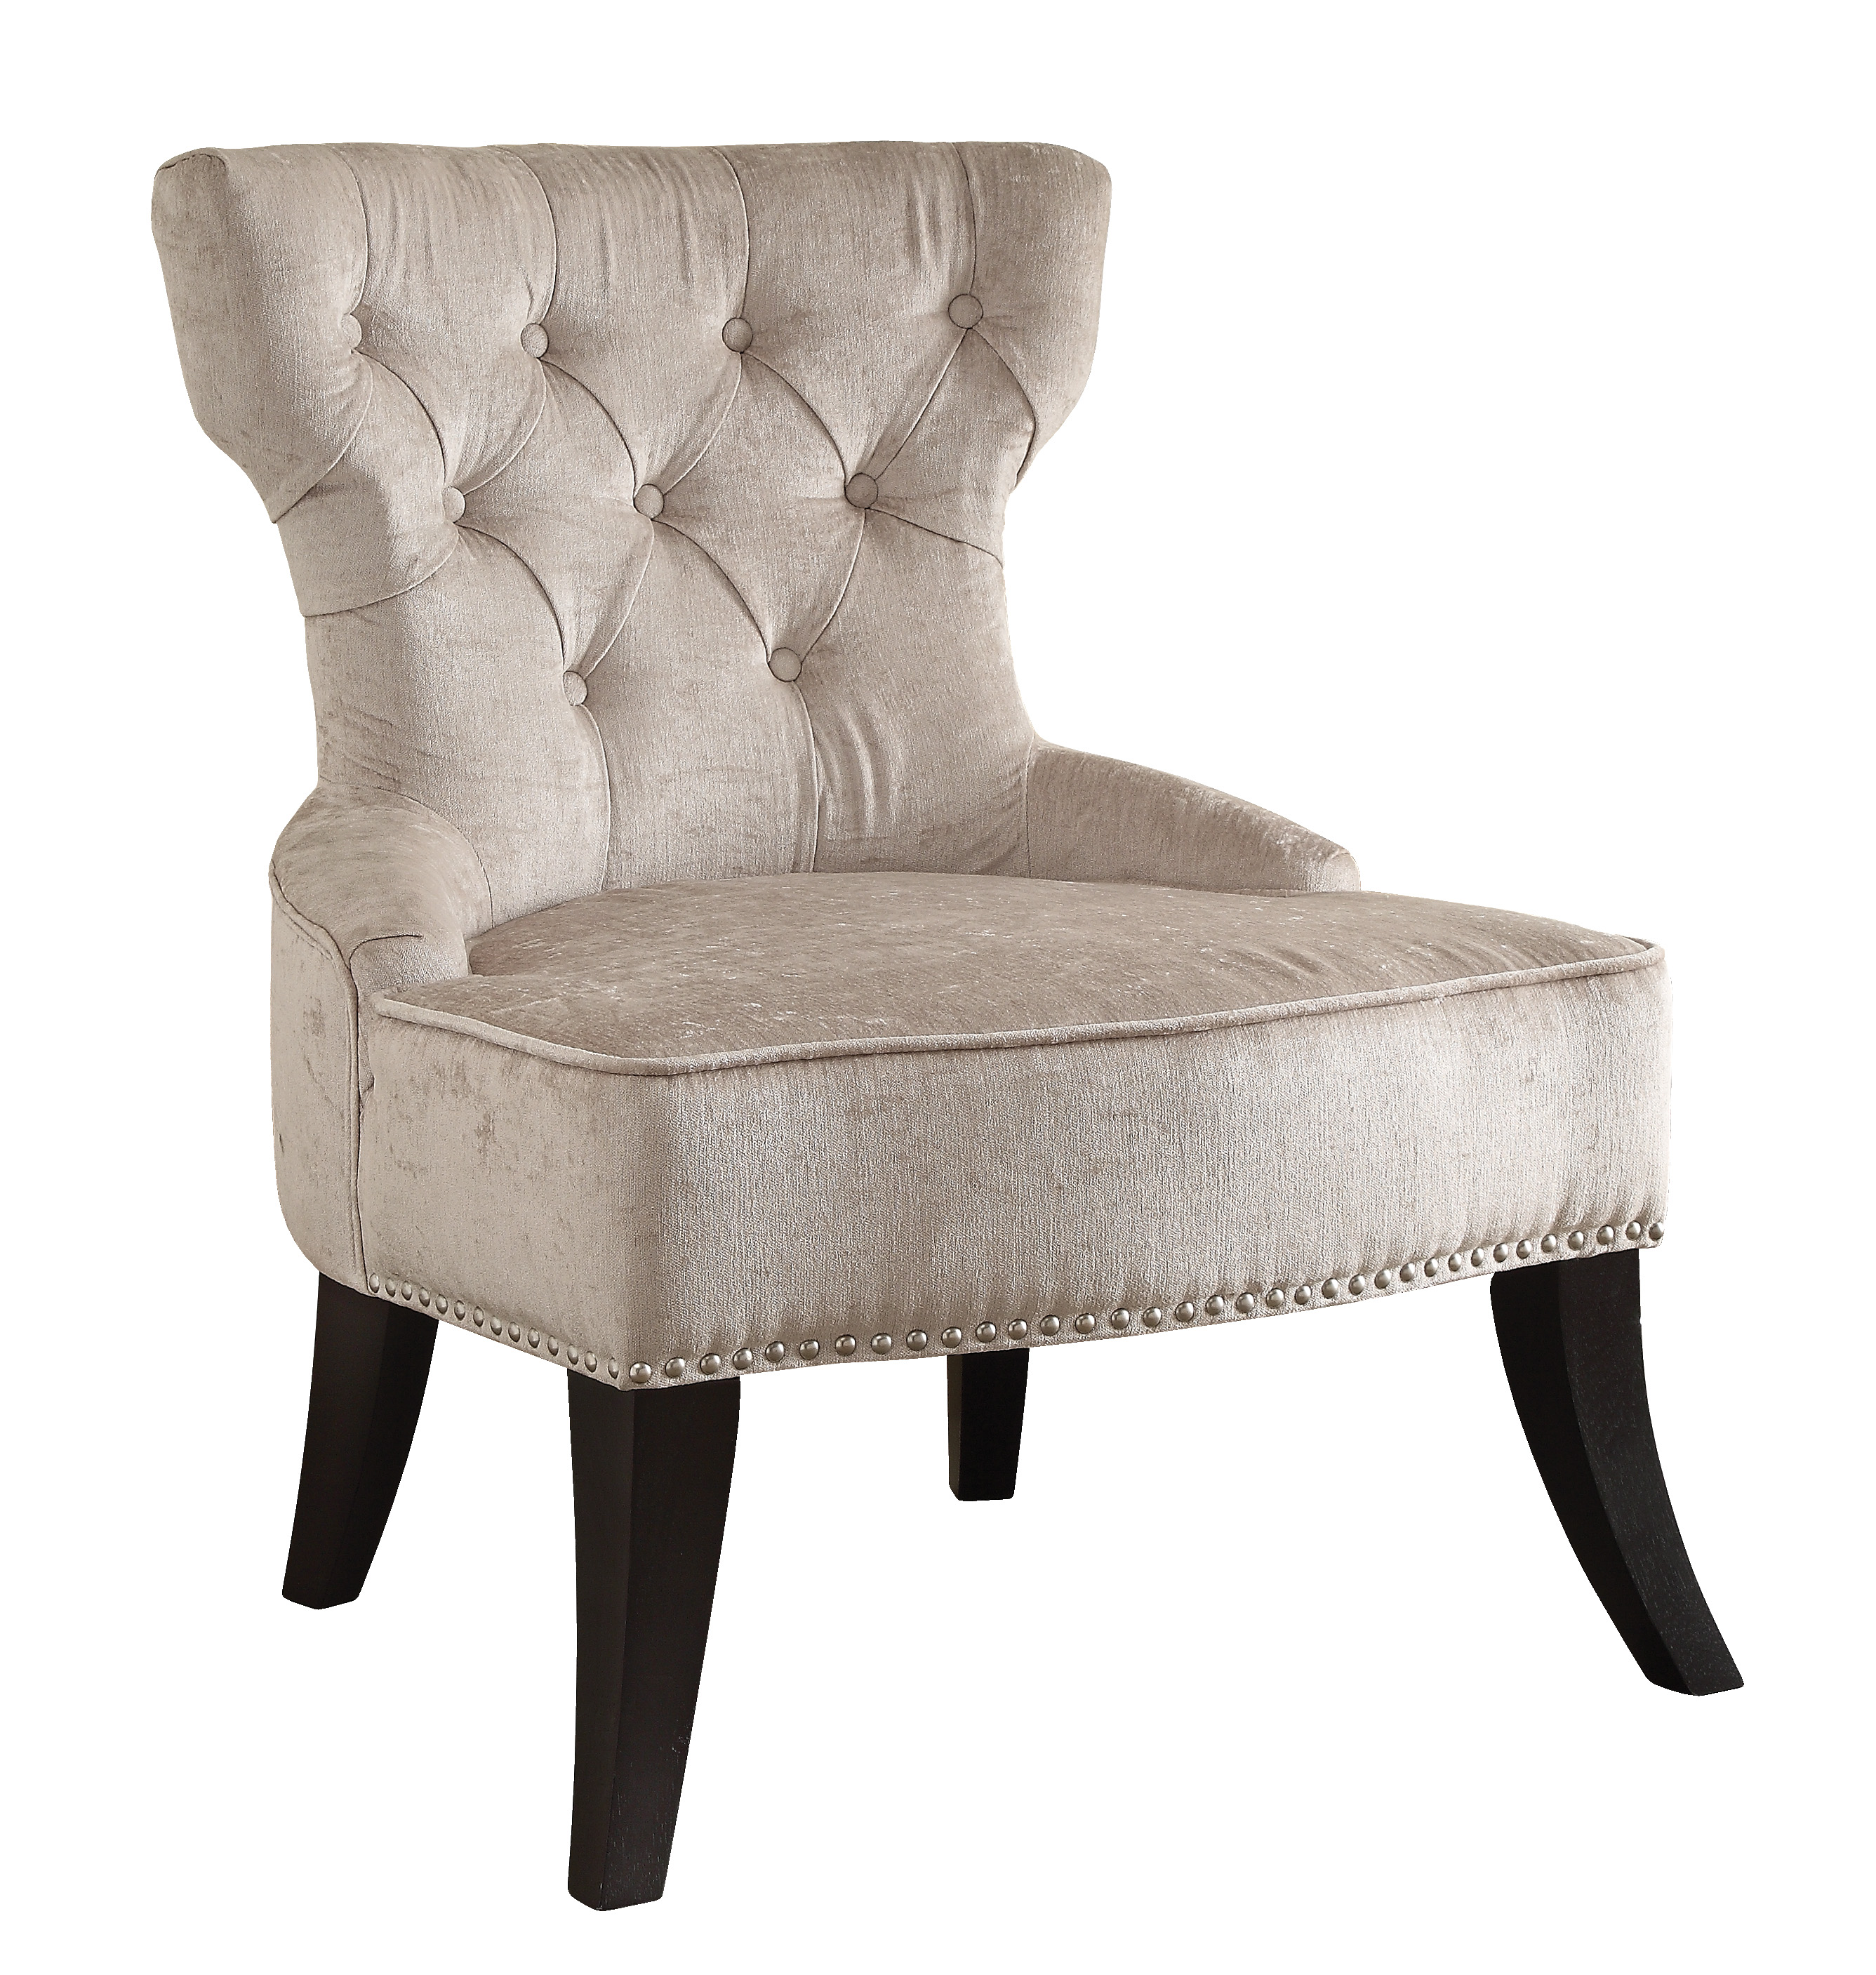 Avenue Six Colton Vintage Style Button Tufted Velvet Chair with Nailhead Detail and Spring Seat